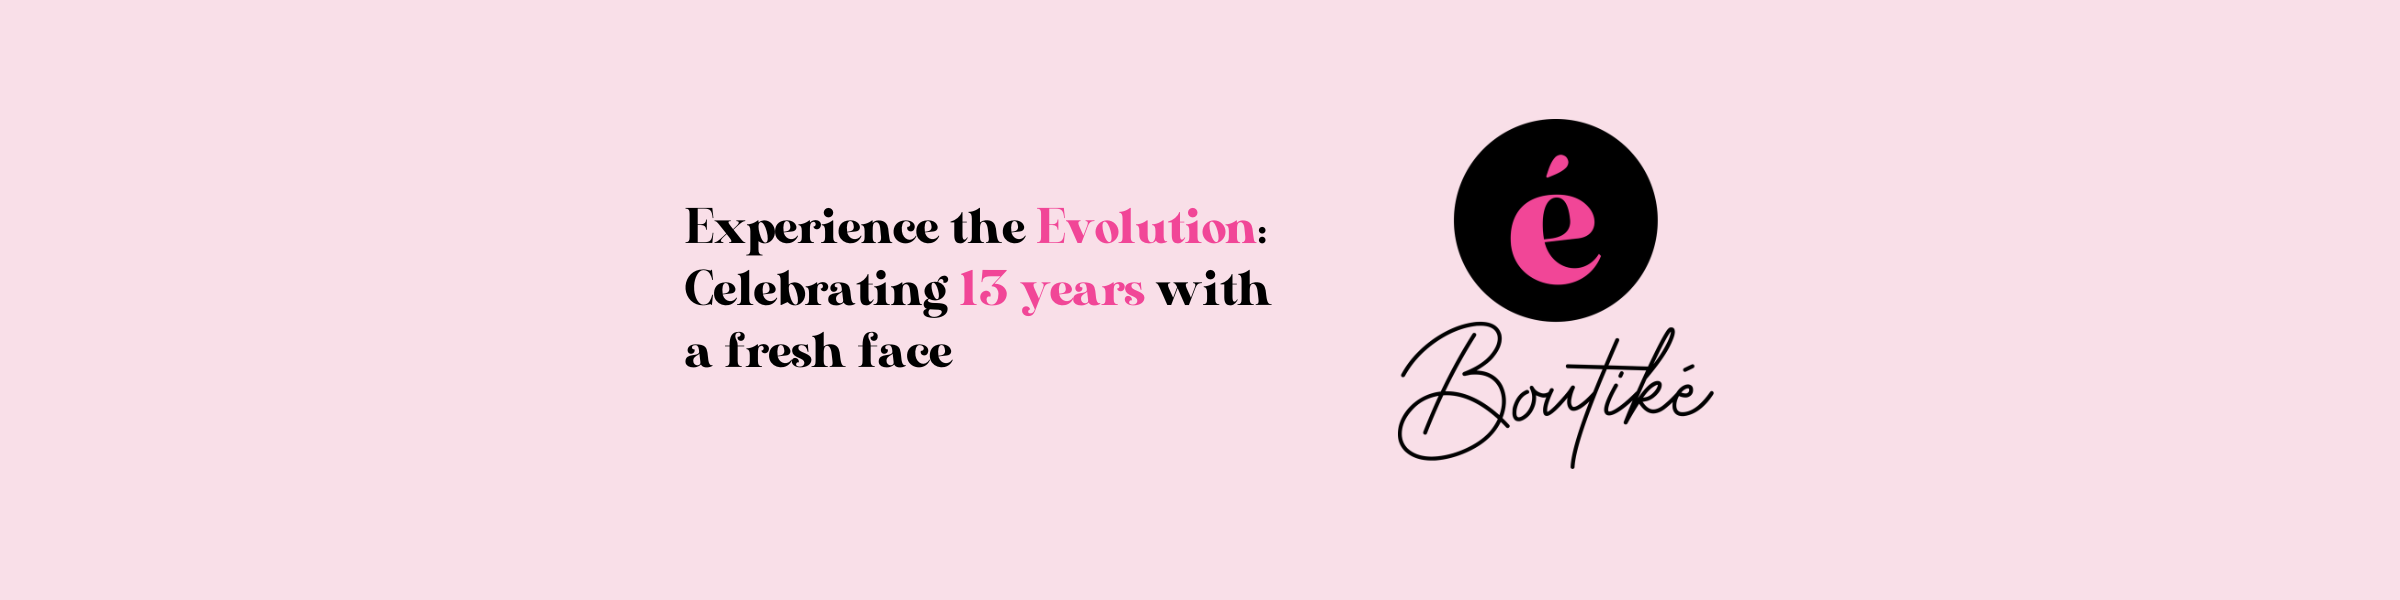 Experience the Evolution: Celebrating 13 years with a fresh face